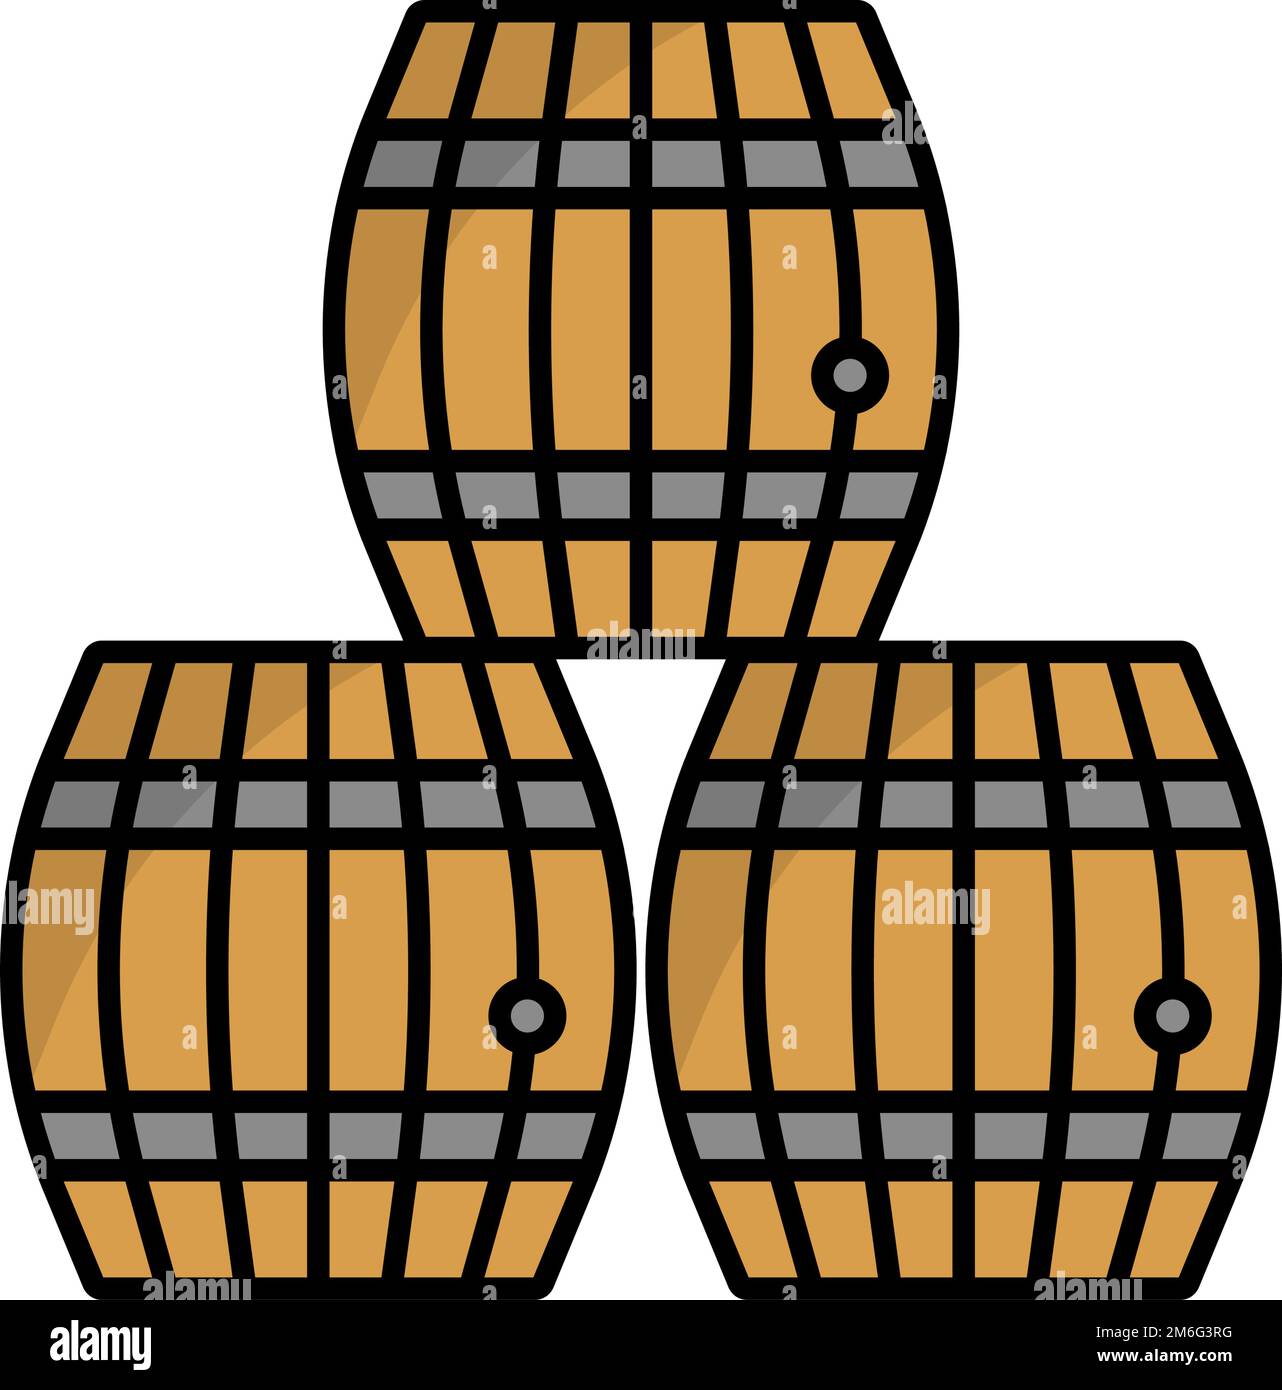 Stacked barrel icons. Wine aging and beer barrels. Editable vector. Stock Vector